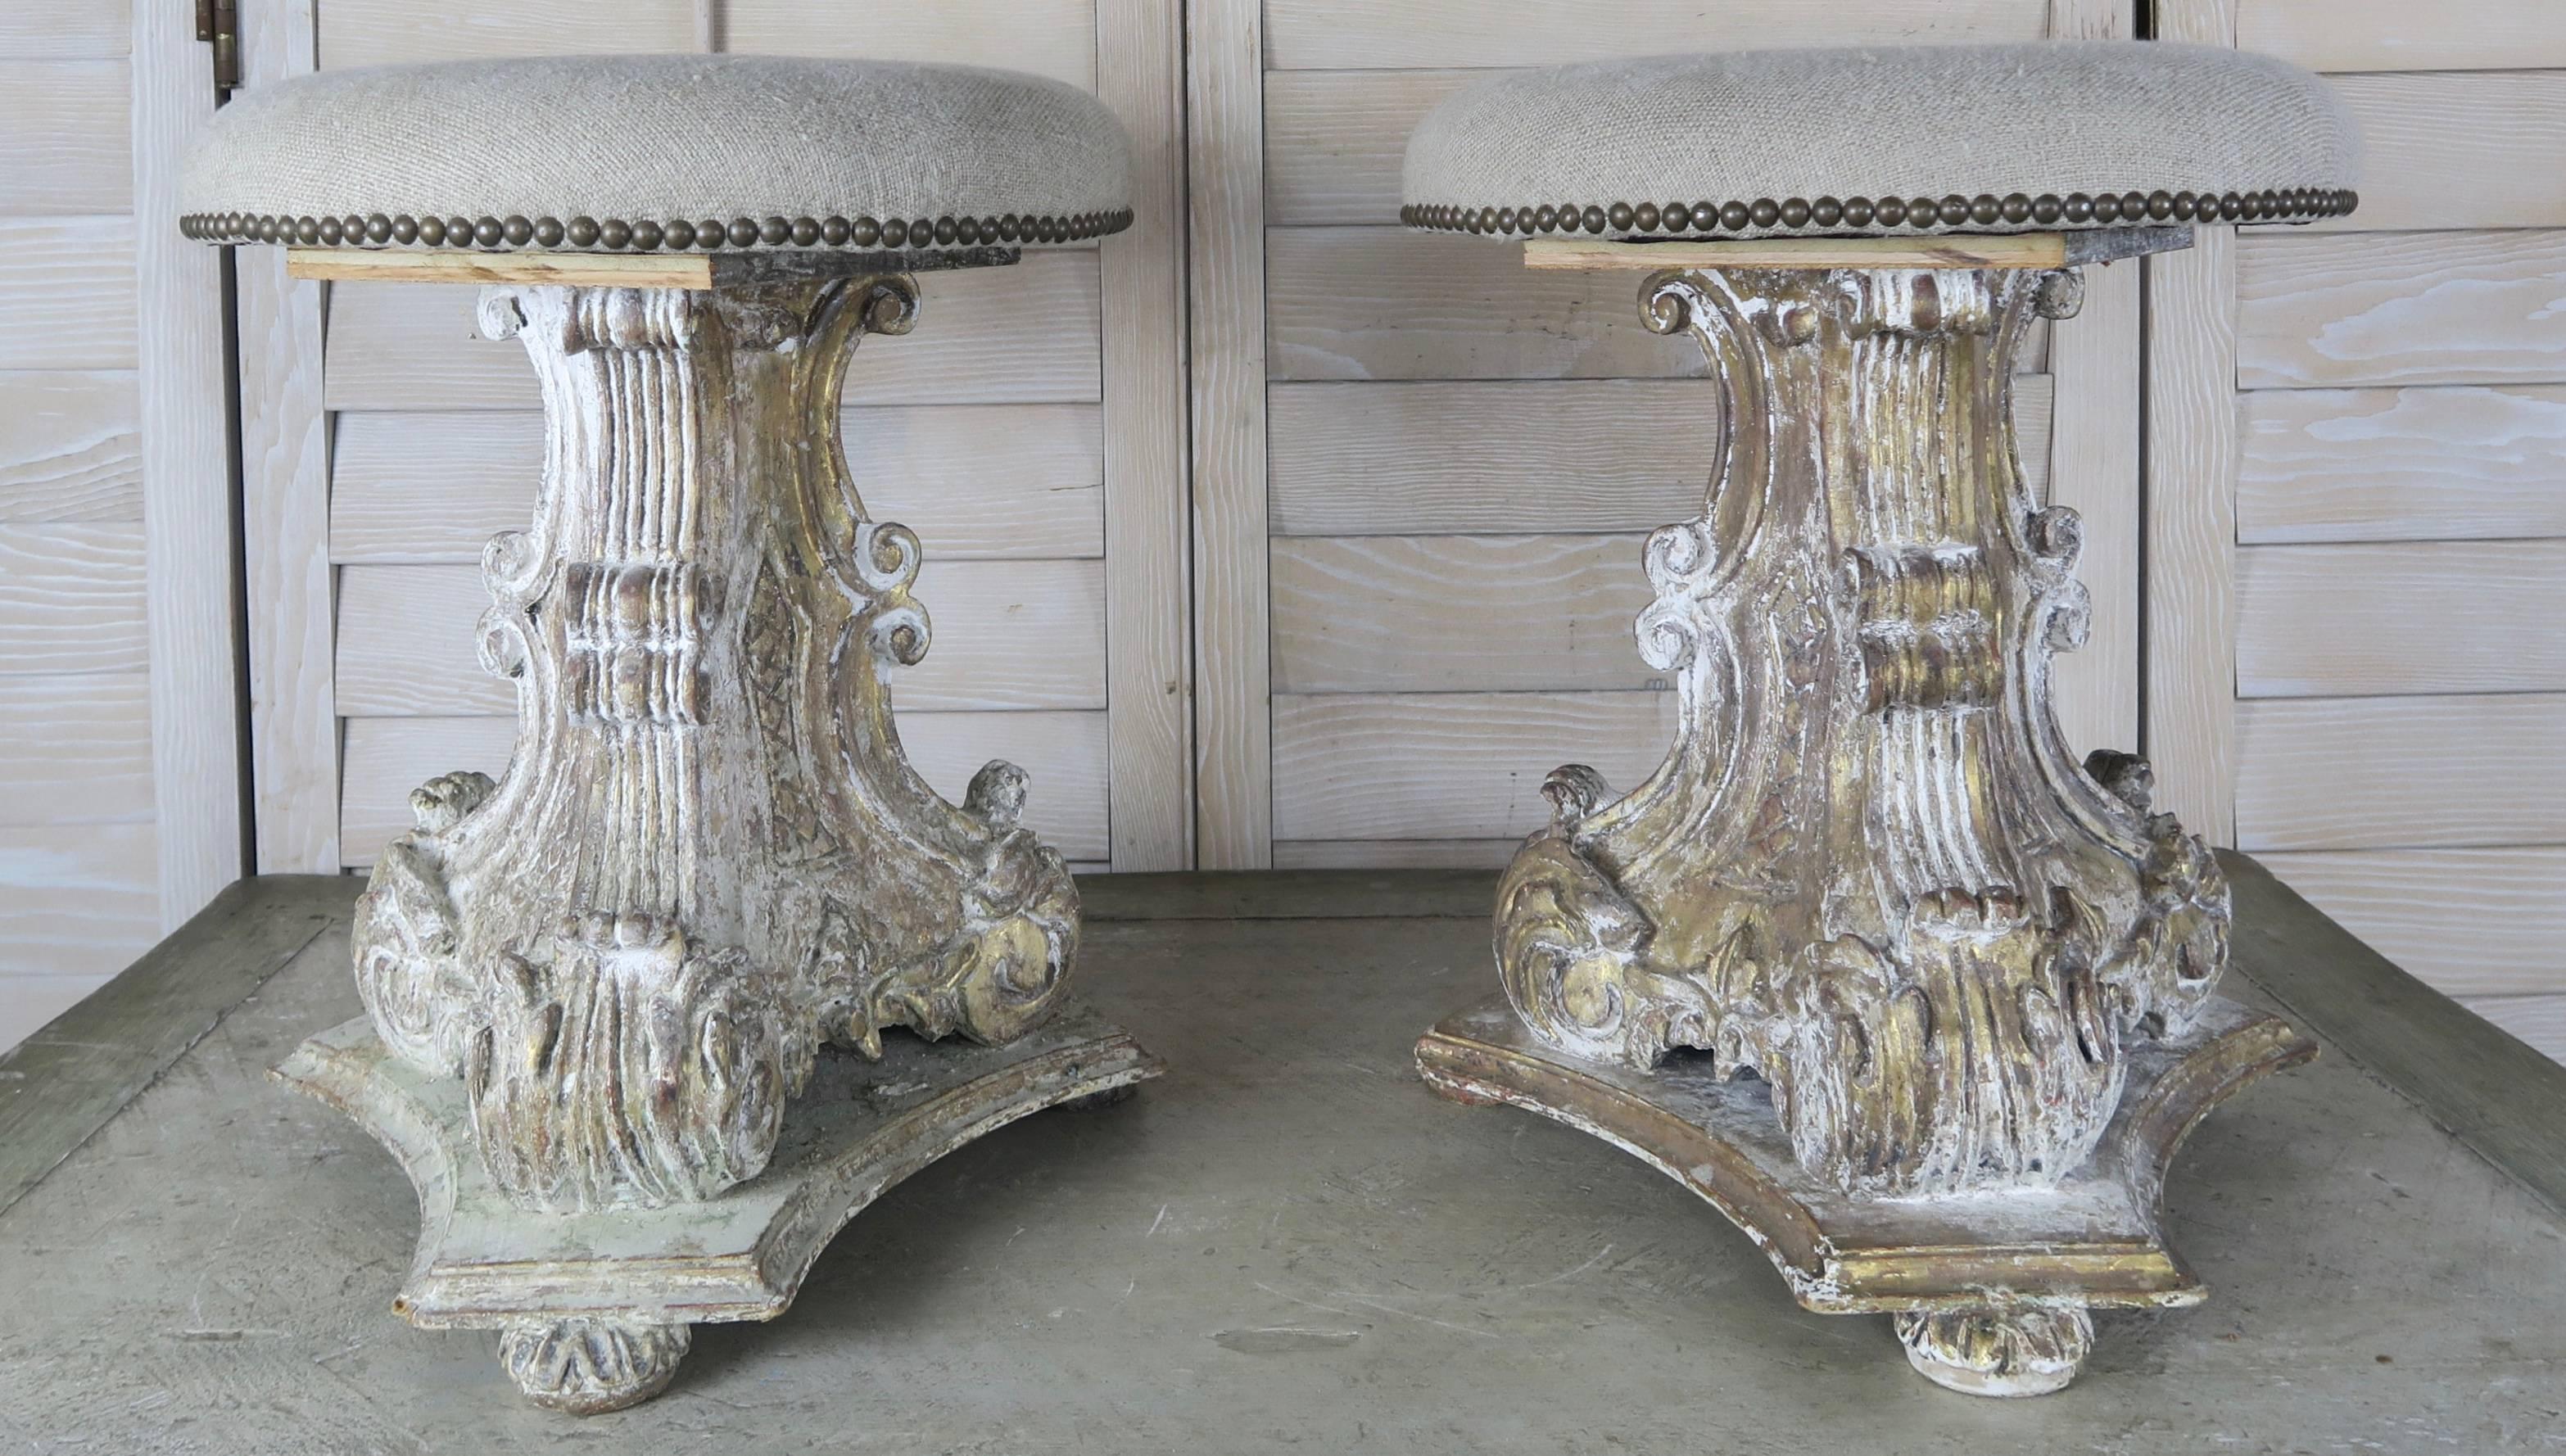 Pair of Italian carved wood painted and parcel-gilt stools newly upholstered in an oatmeal colored Belgium linen with brass nailhead trim detail. Remnants of gold leaf and gesso throughout.